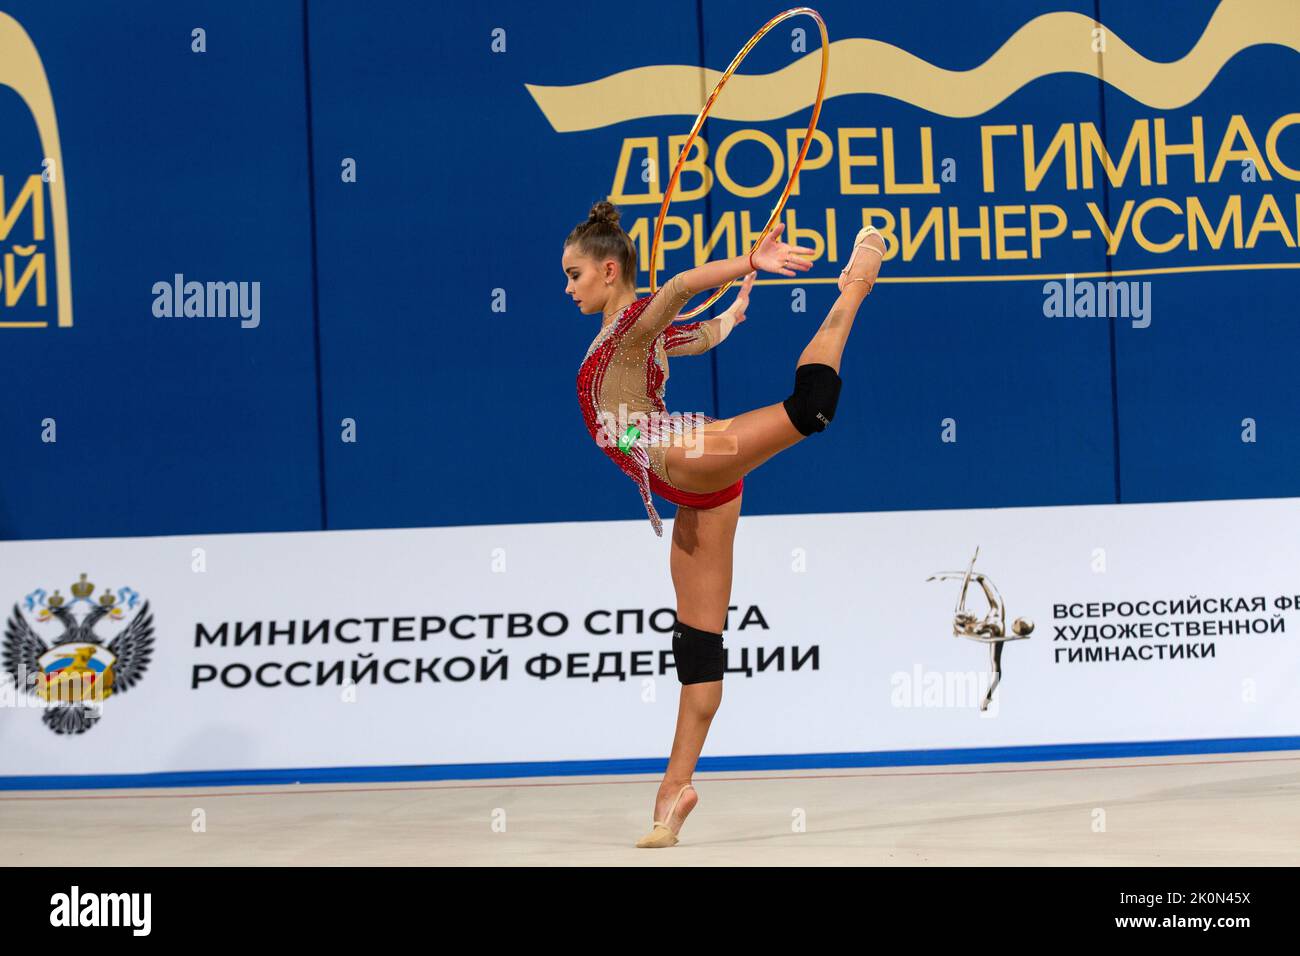 Moscow, Russia. 12th of September, 2022. Arina Averina trains with a hoop before start a qualification at the 2022 All-Russian Summer Spartakiad in Rhythmic Gymnastics at Irina Viner-Usmanova Gymnastics Palace in Luzhniki in Moscow, Russia. Nikolay Vinokurov/Alamy Live News Stock Photo